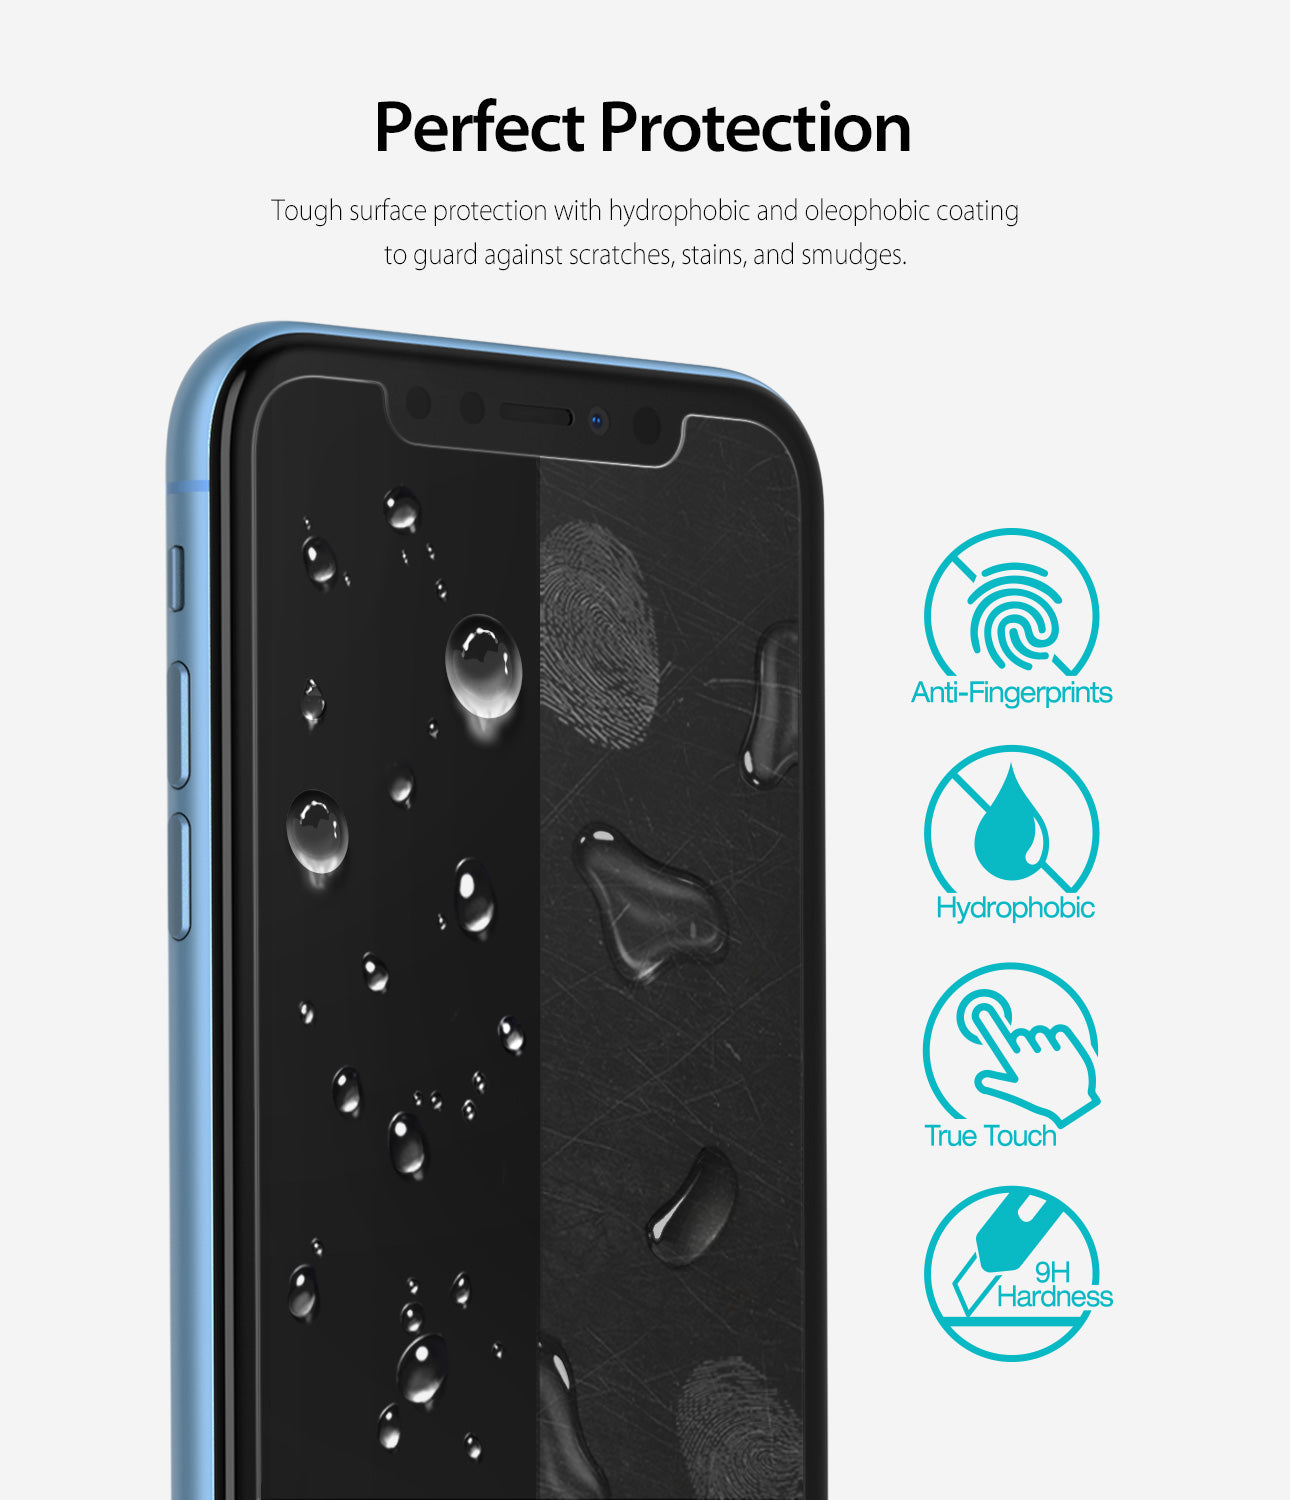 iPhone XR Screen Protector | Invisible Defender Glass - Perfect Protection